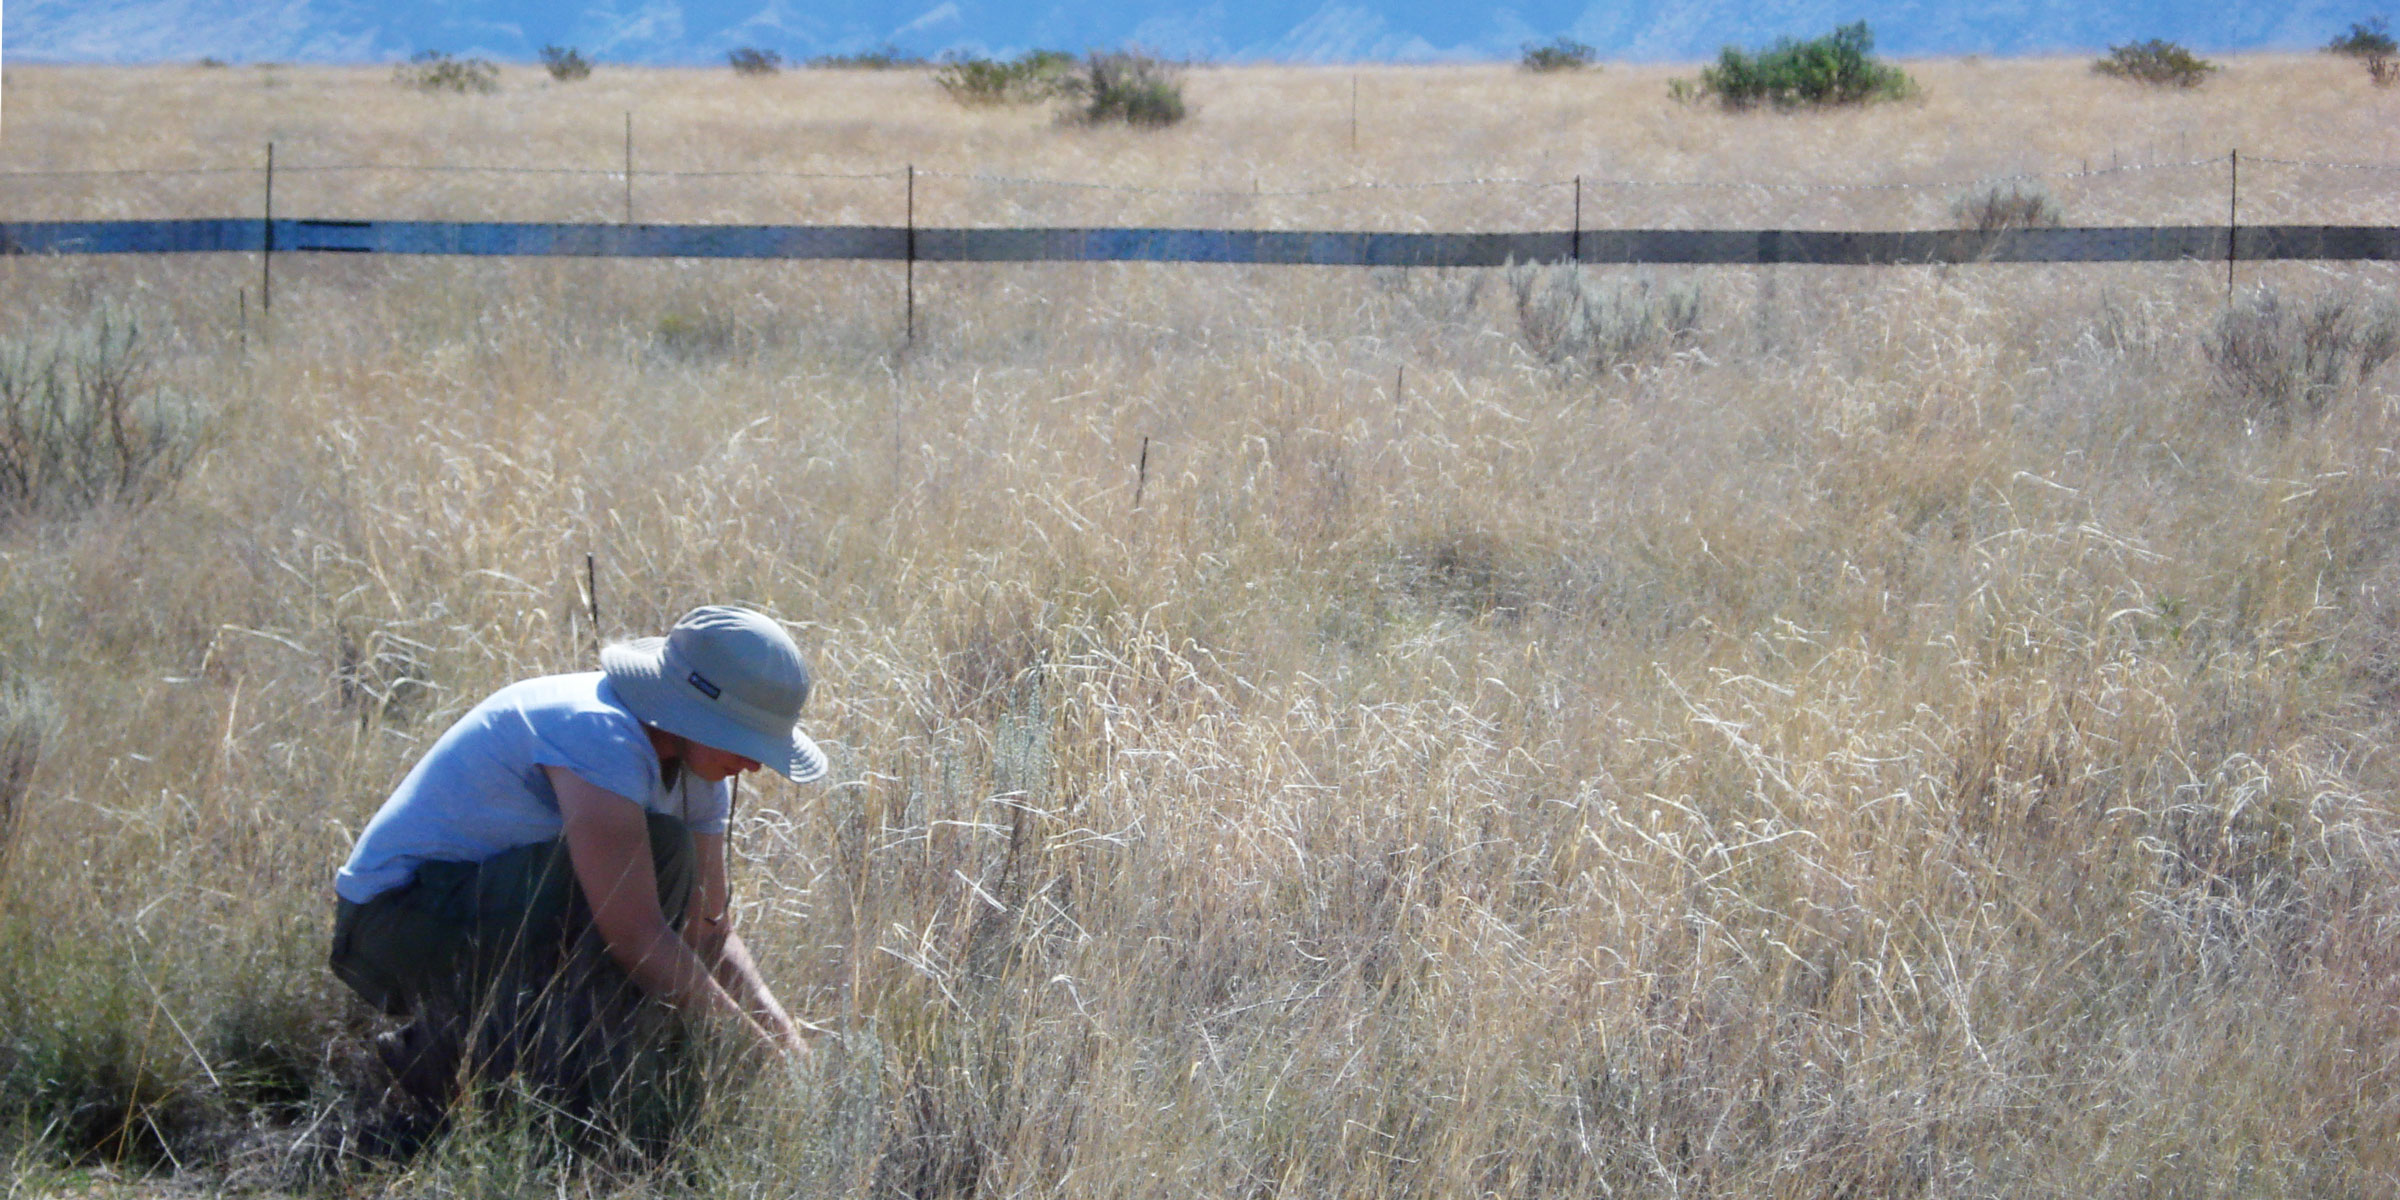 A researcher takes a measurement in front a span of wildlife-excluding fence.